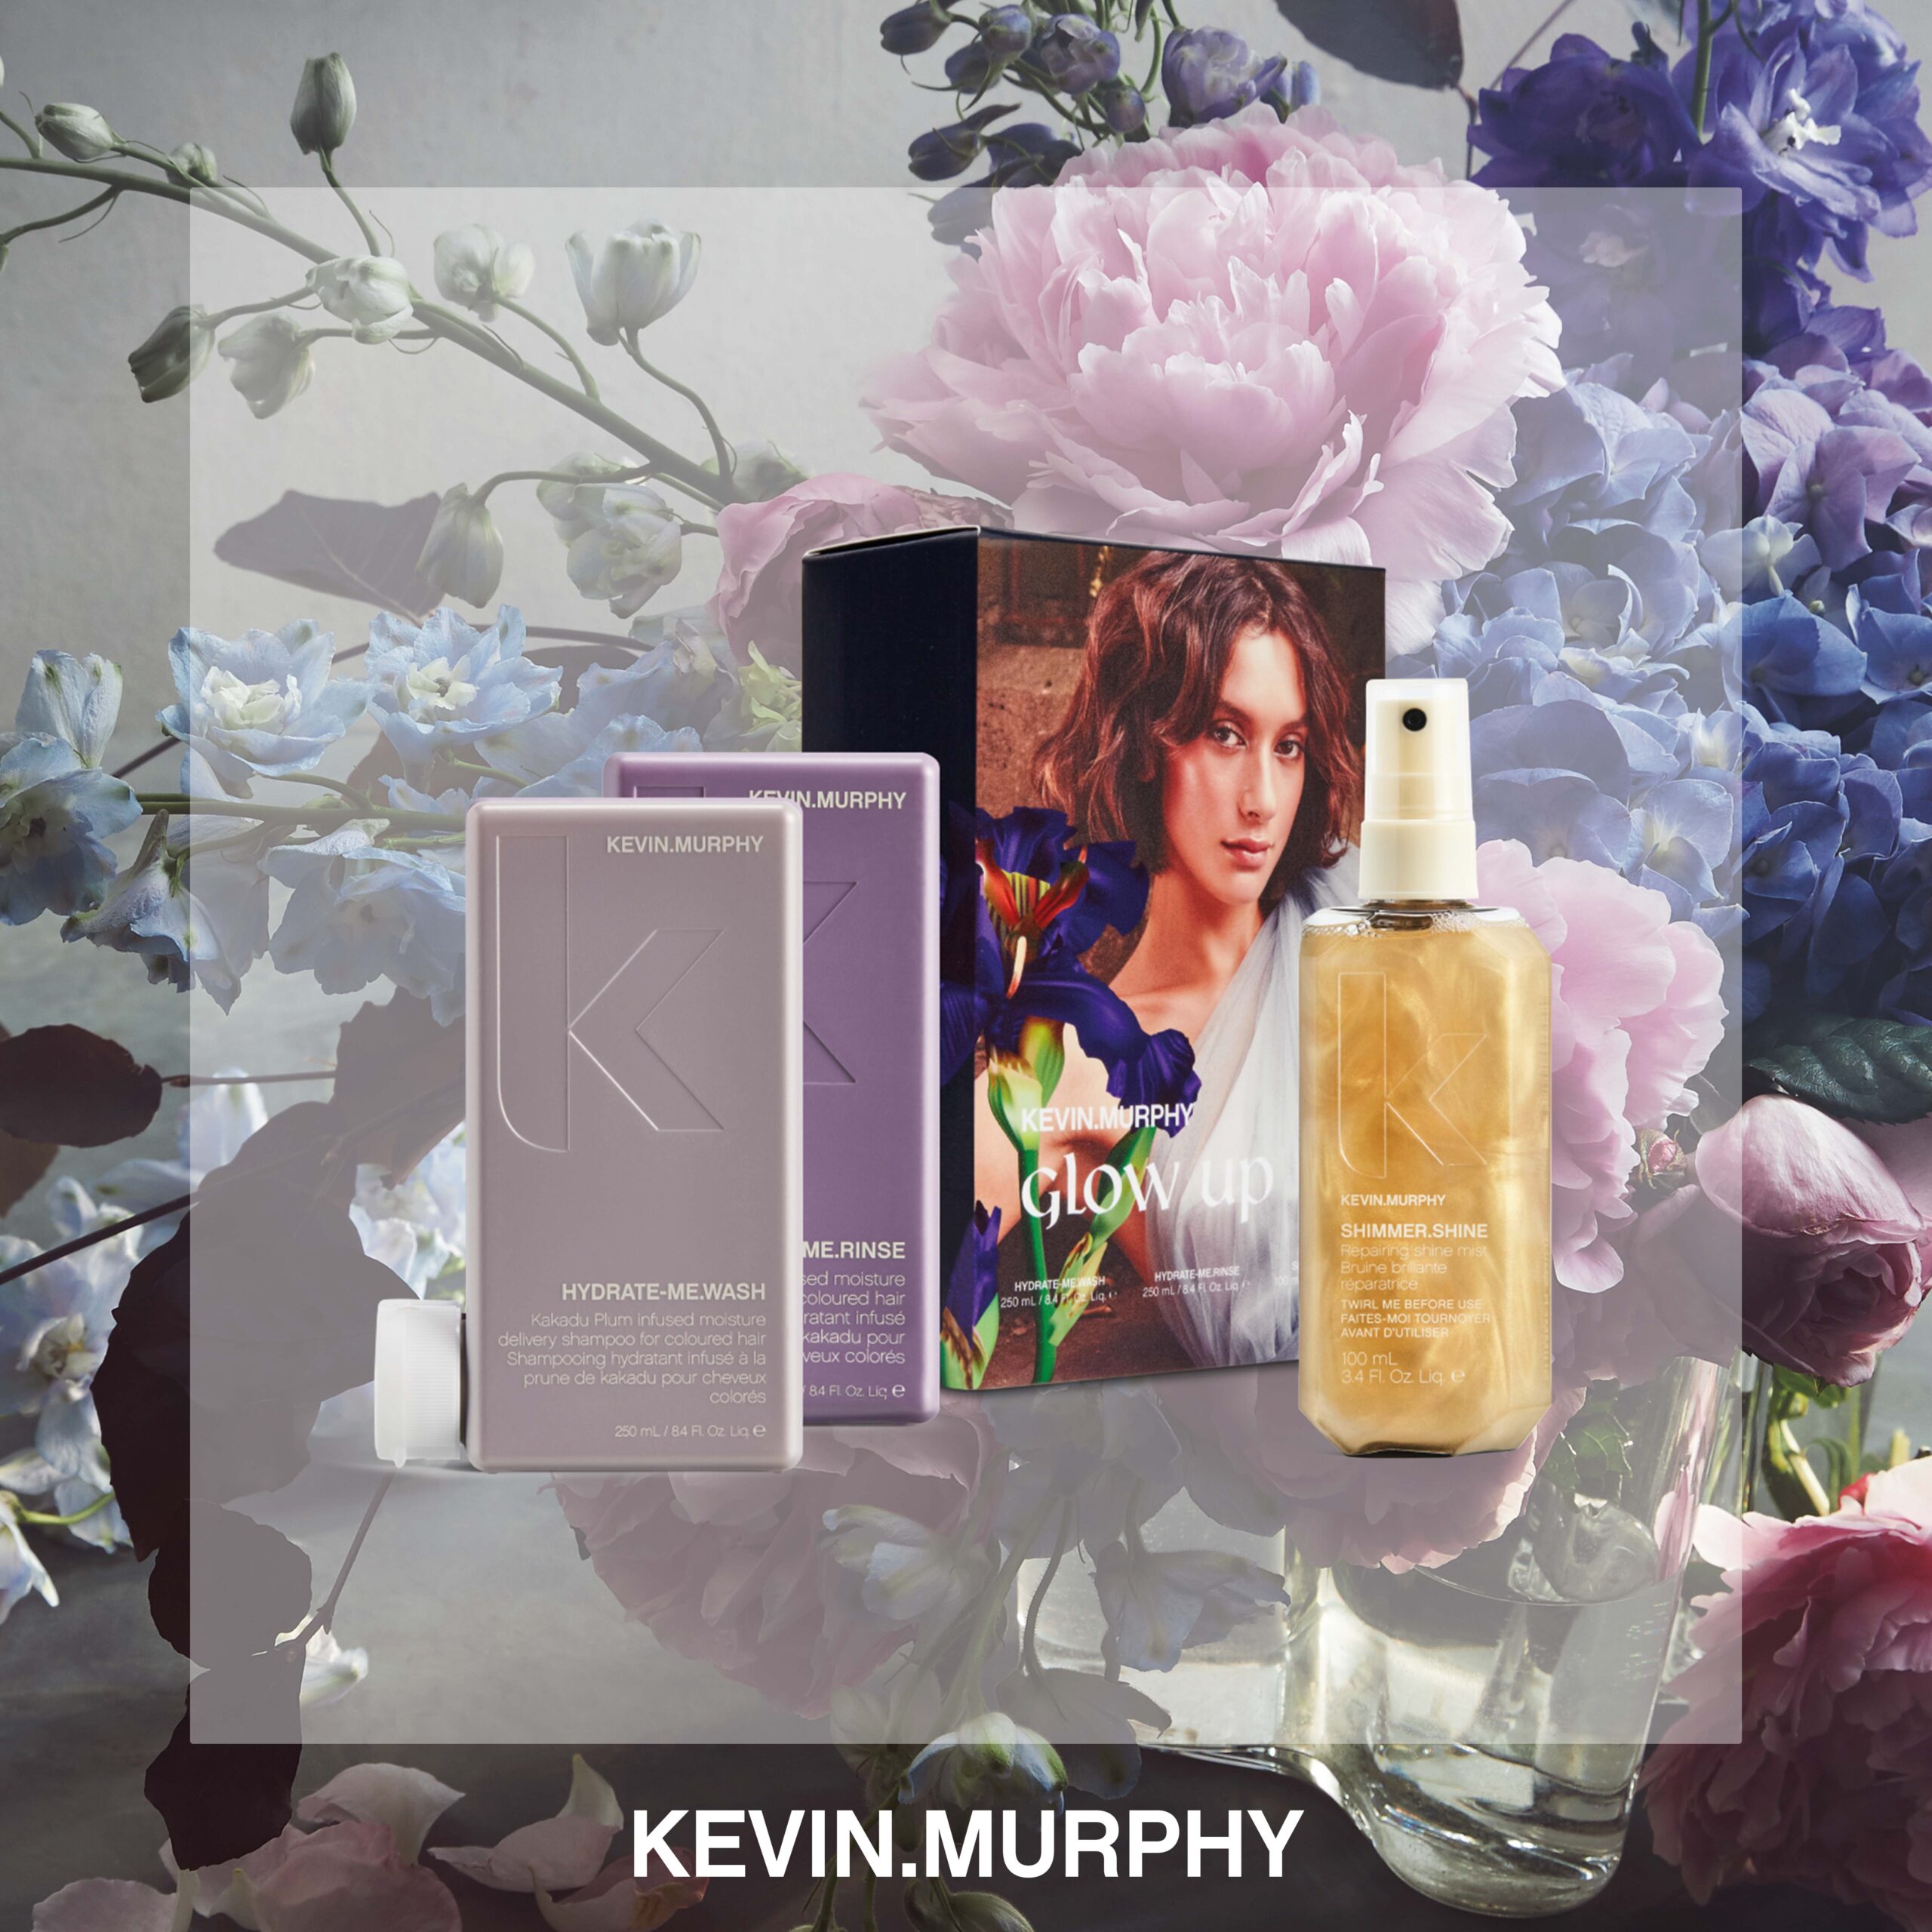 Kevin Murphy: Glow up